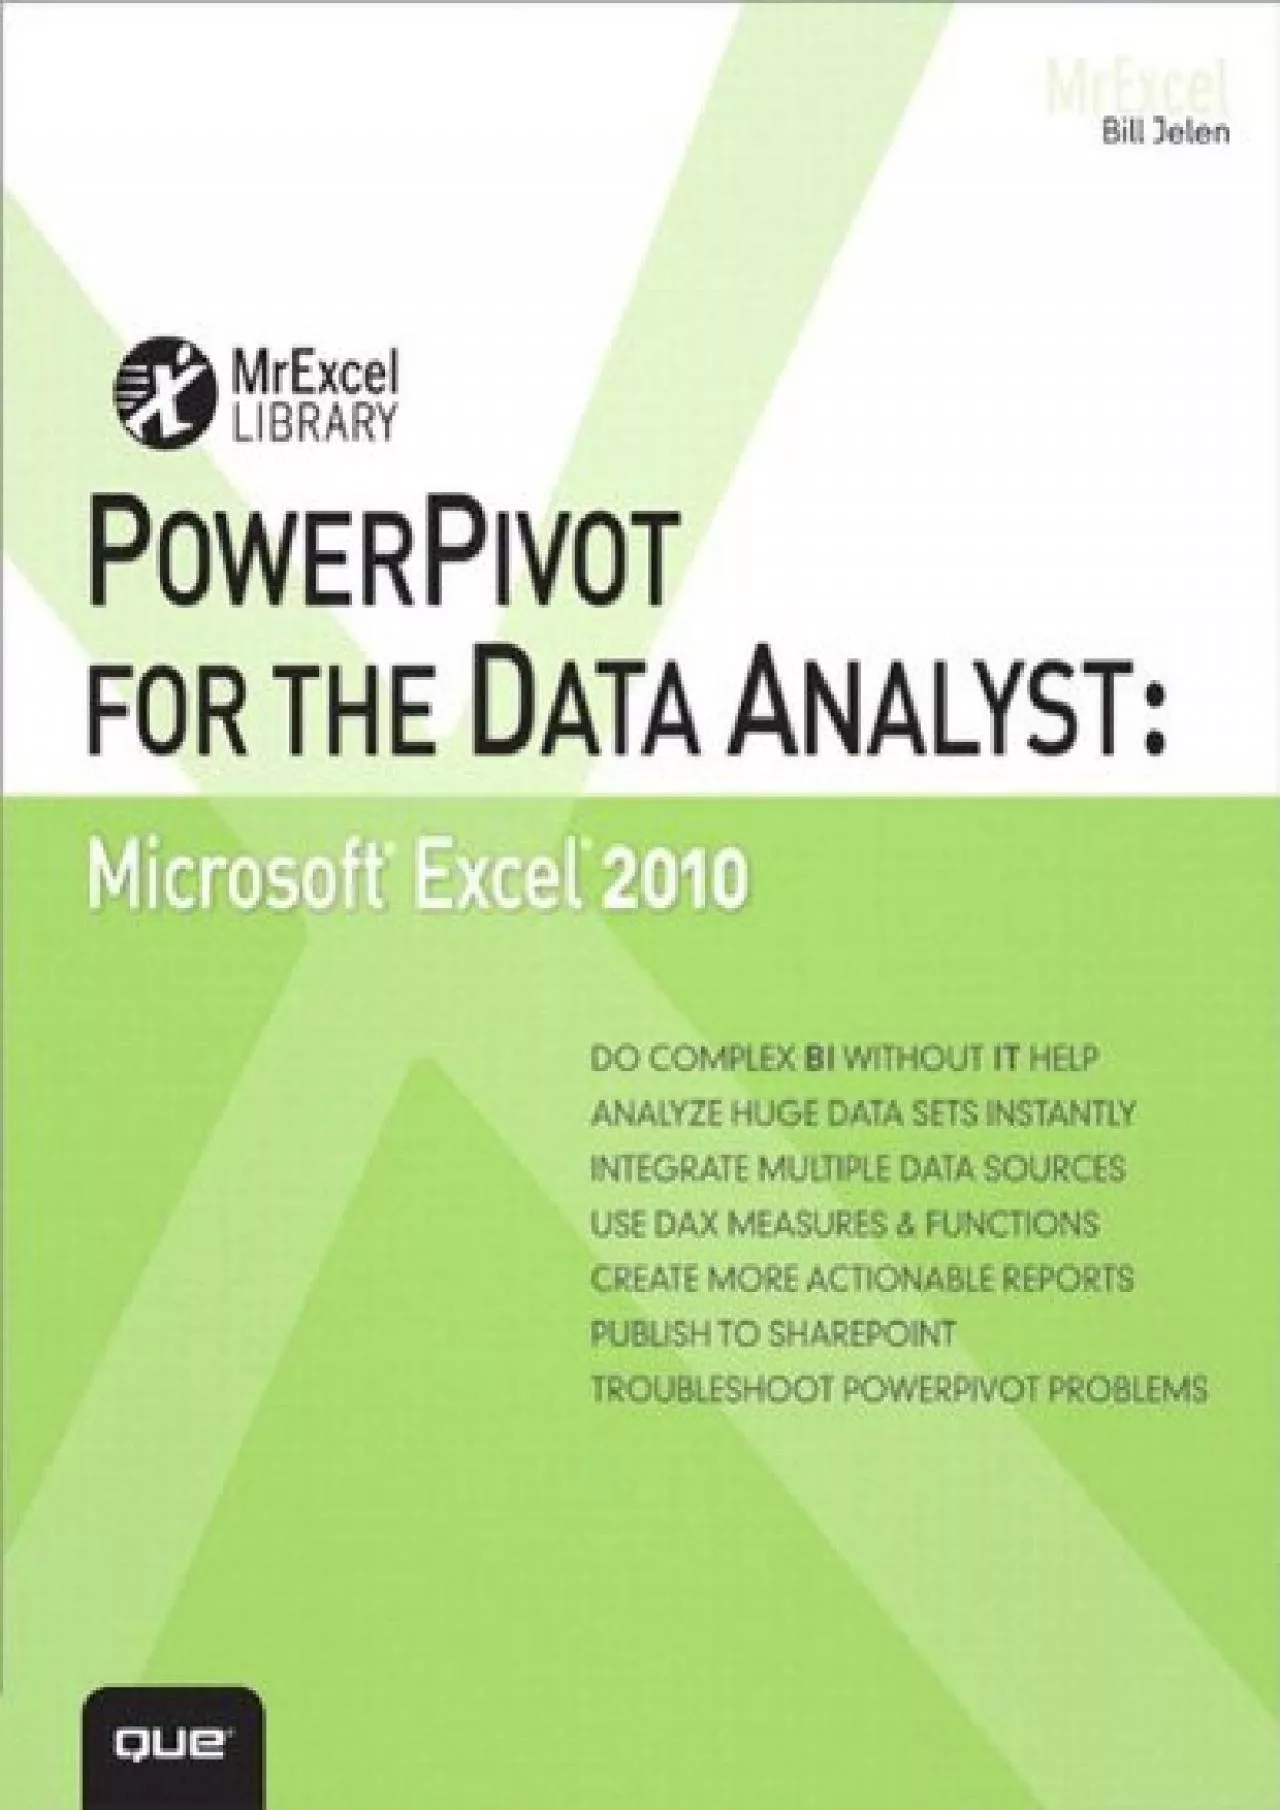 (DOWNLOAD)-PowerPivot for the Data Analyst: Microsoft Excel 2010 (MrExcel Library)